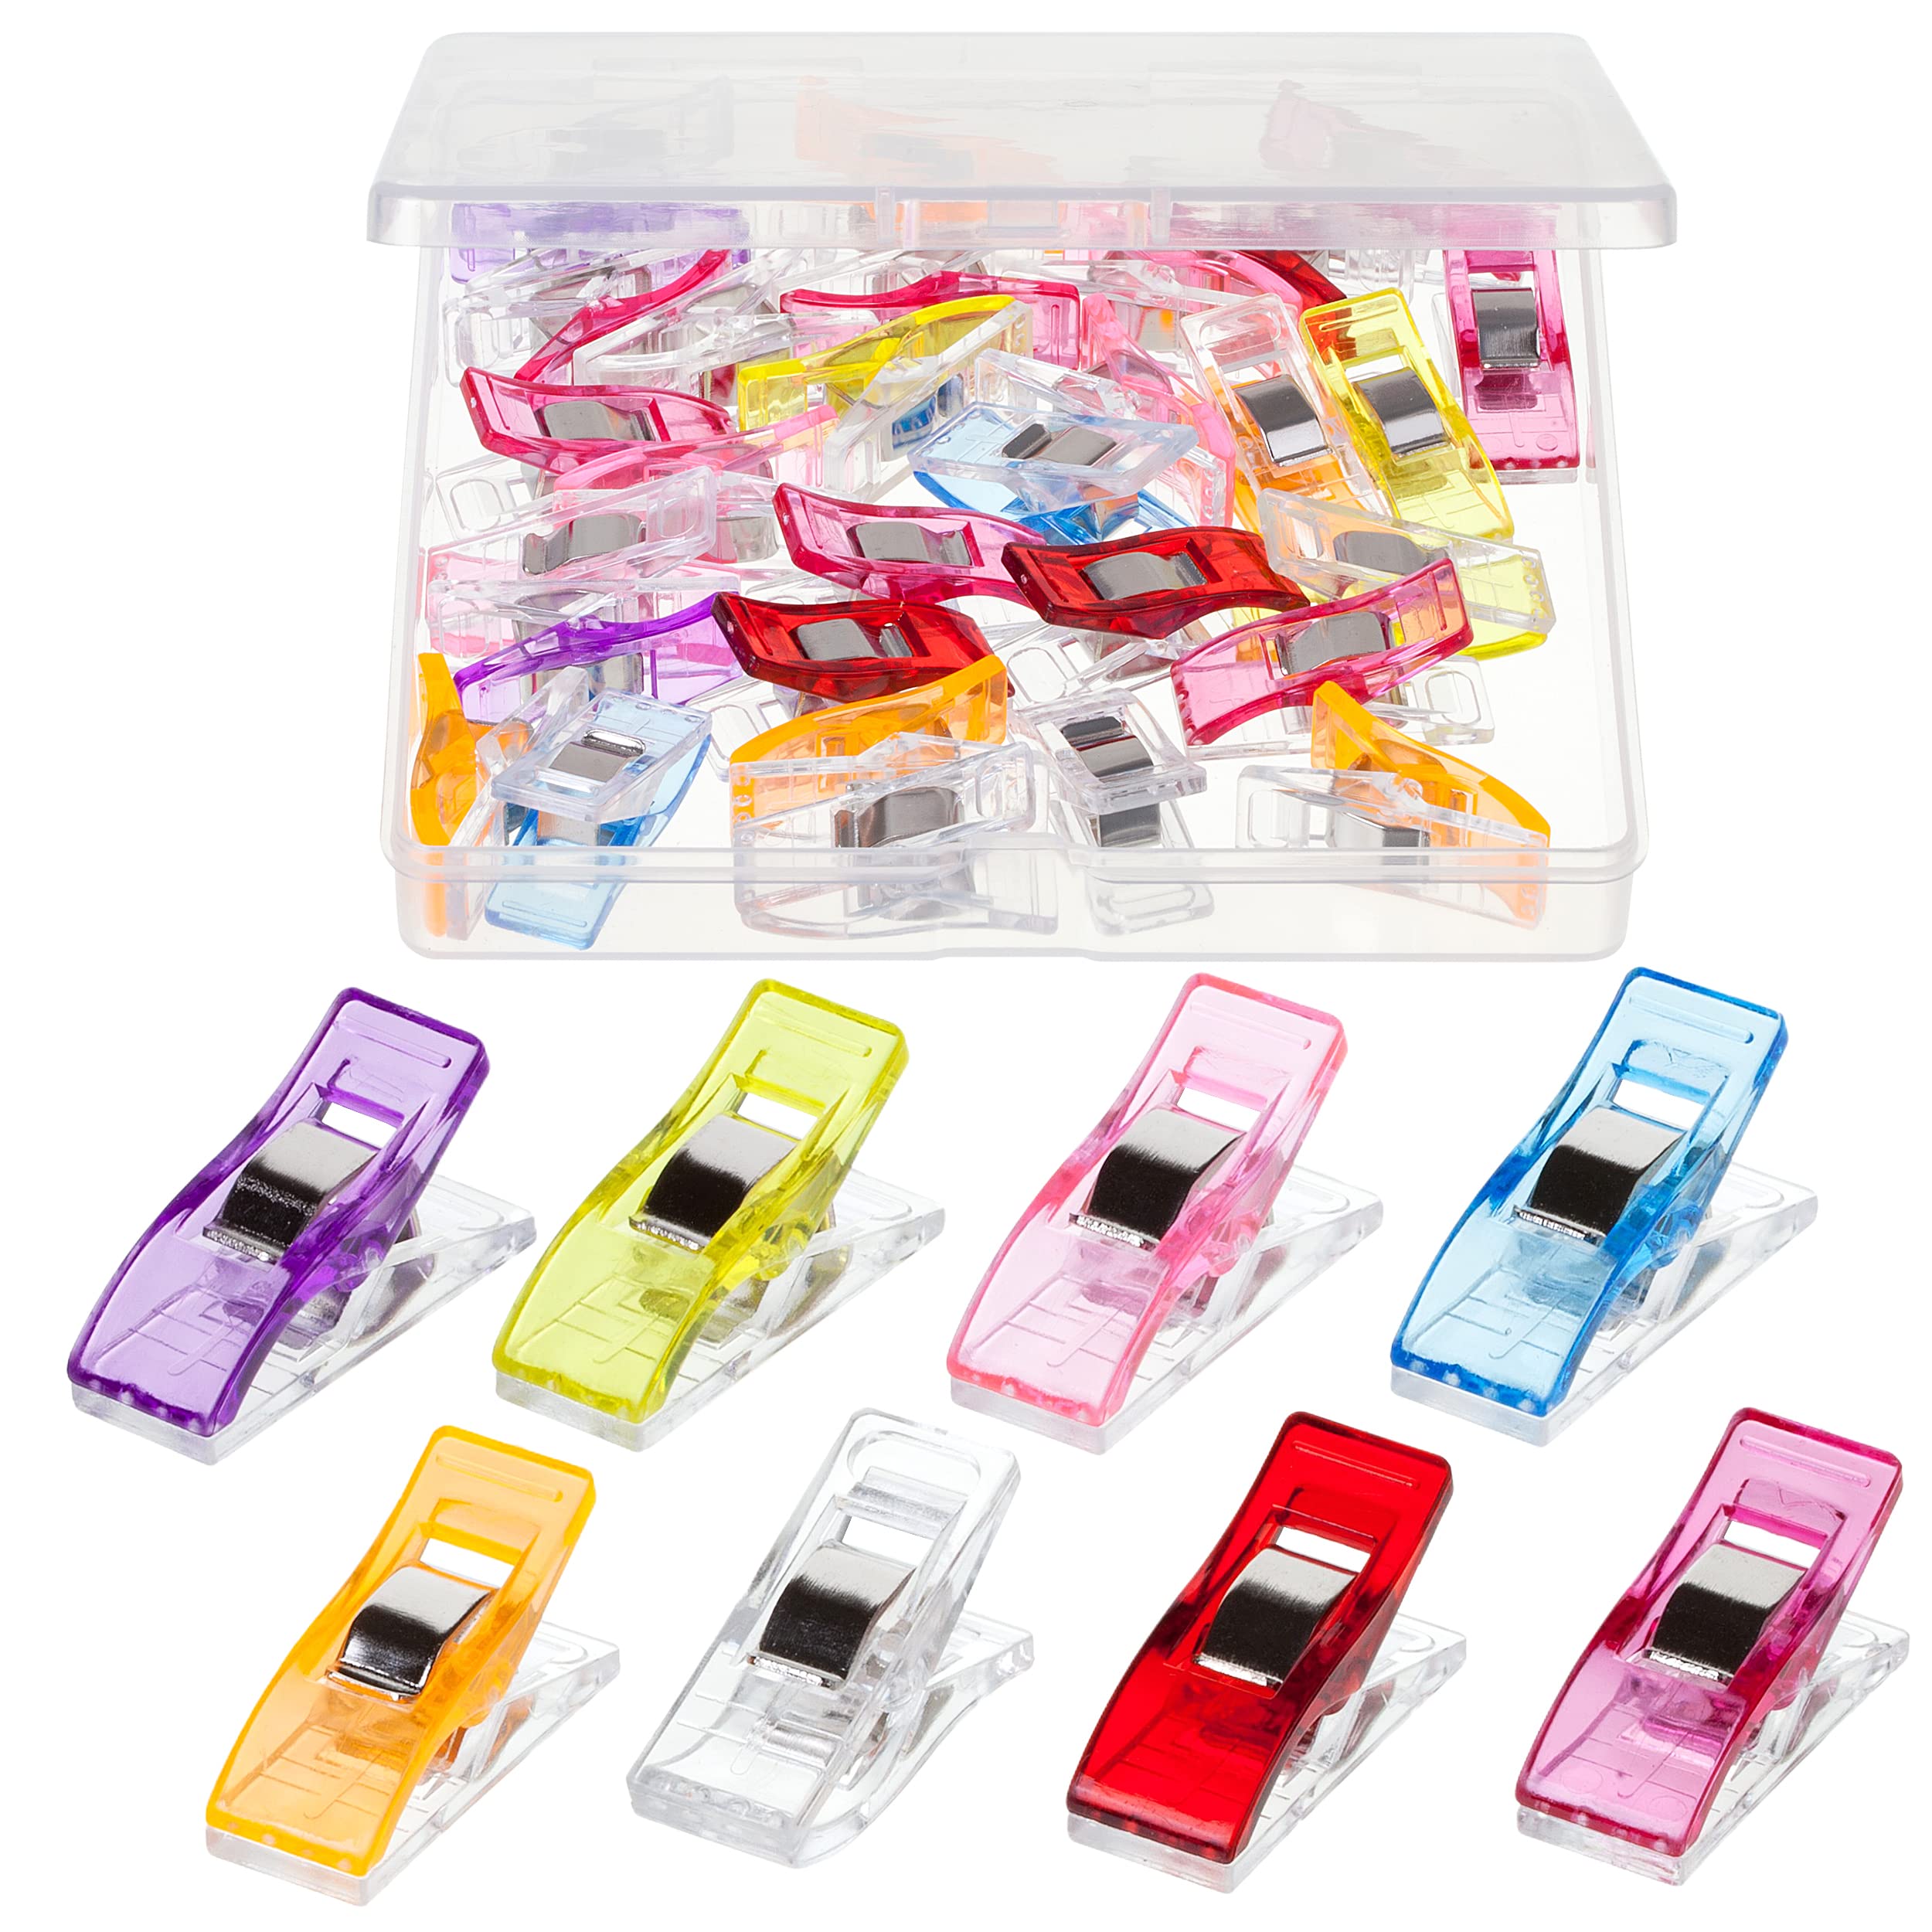 Mr. Pen- Sewing Clips 30 pcs Assorted Colors Sewing Clips for